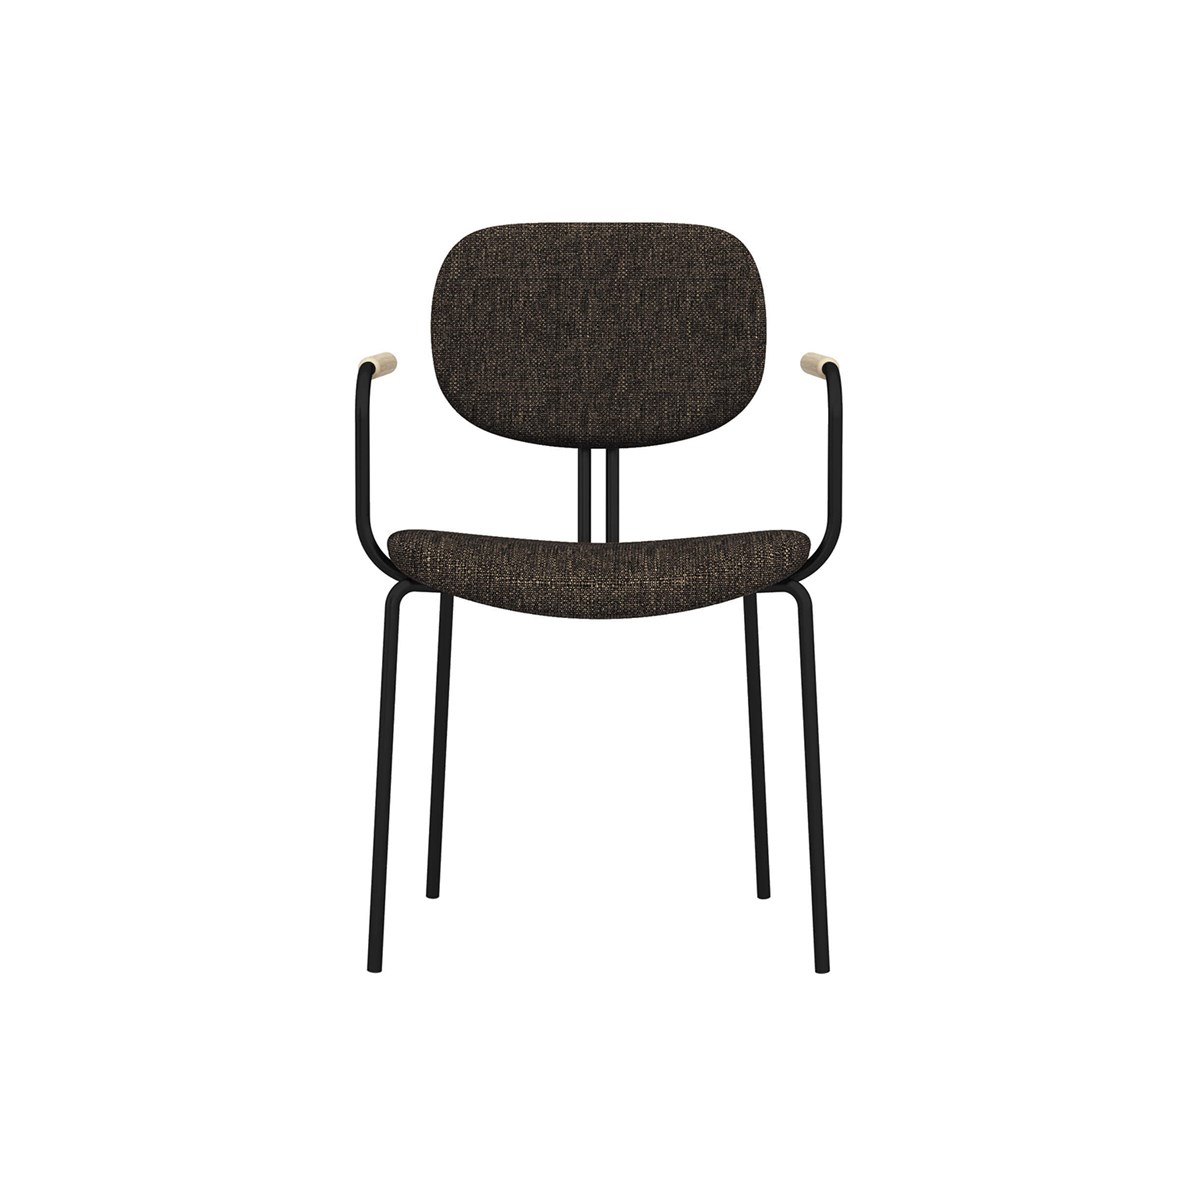 Neospace-Panama-Chair-Contract-Matisse-2